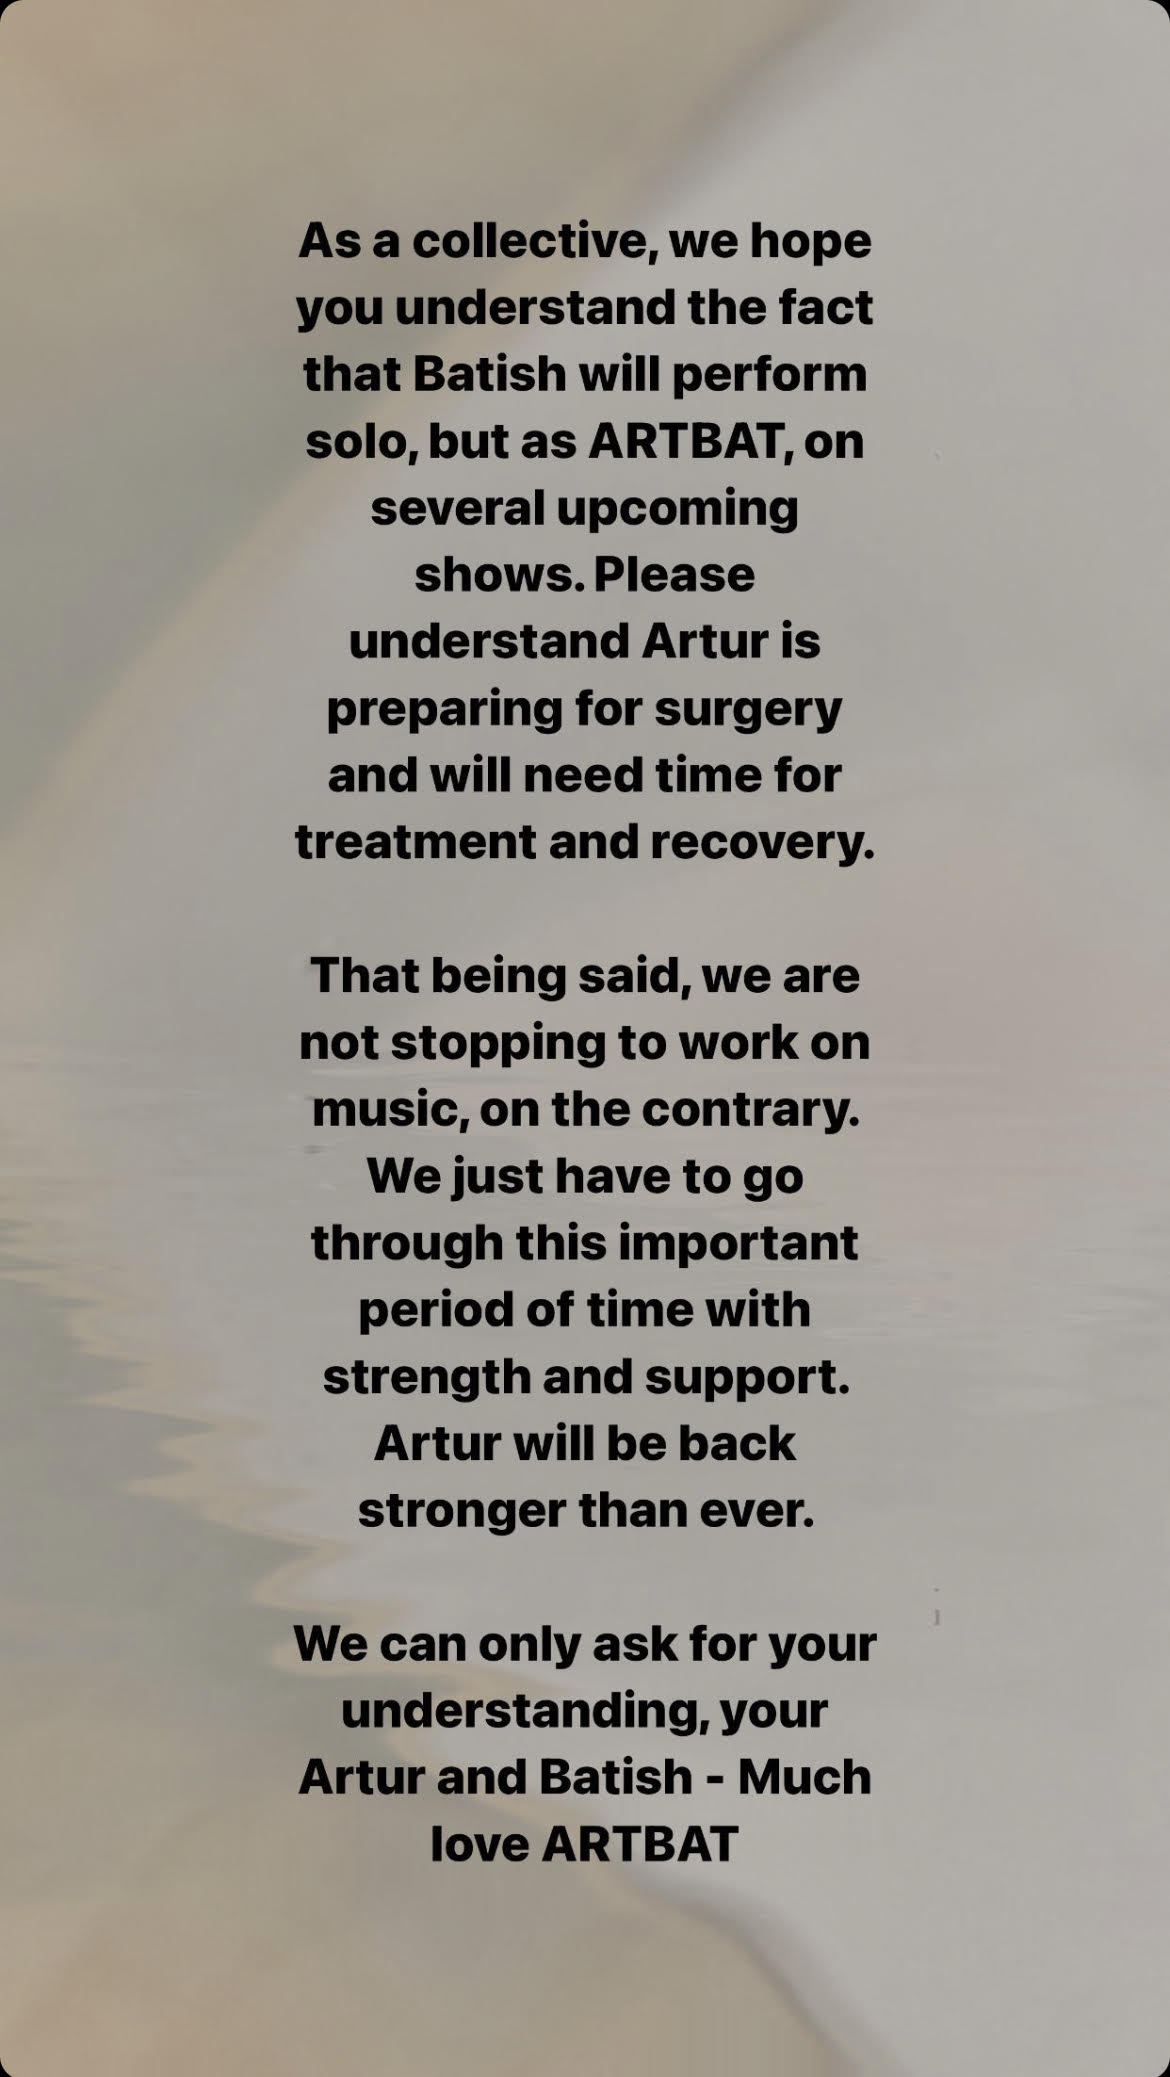 Melodic Duo ARTBAT Announces Artur Will Step Away As He Undergoes Surgery